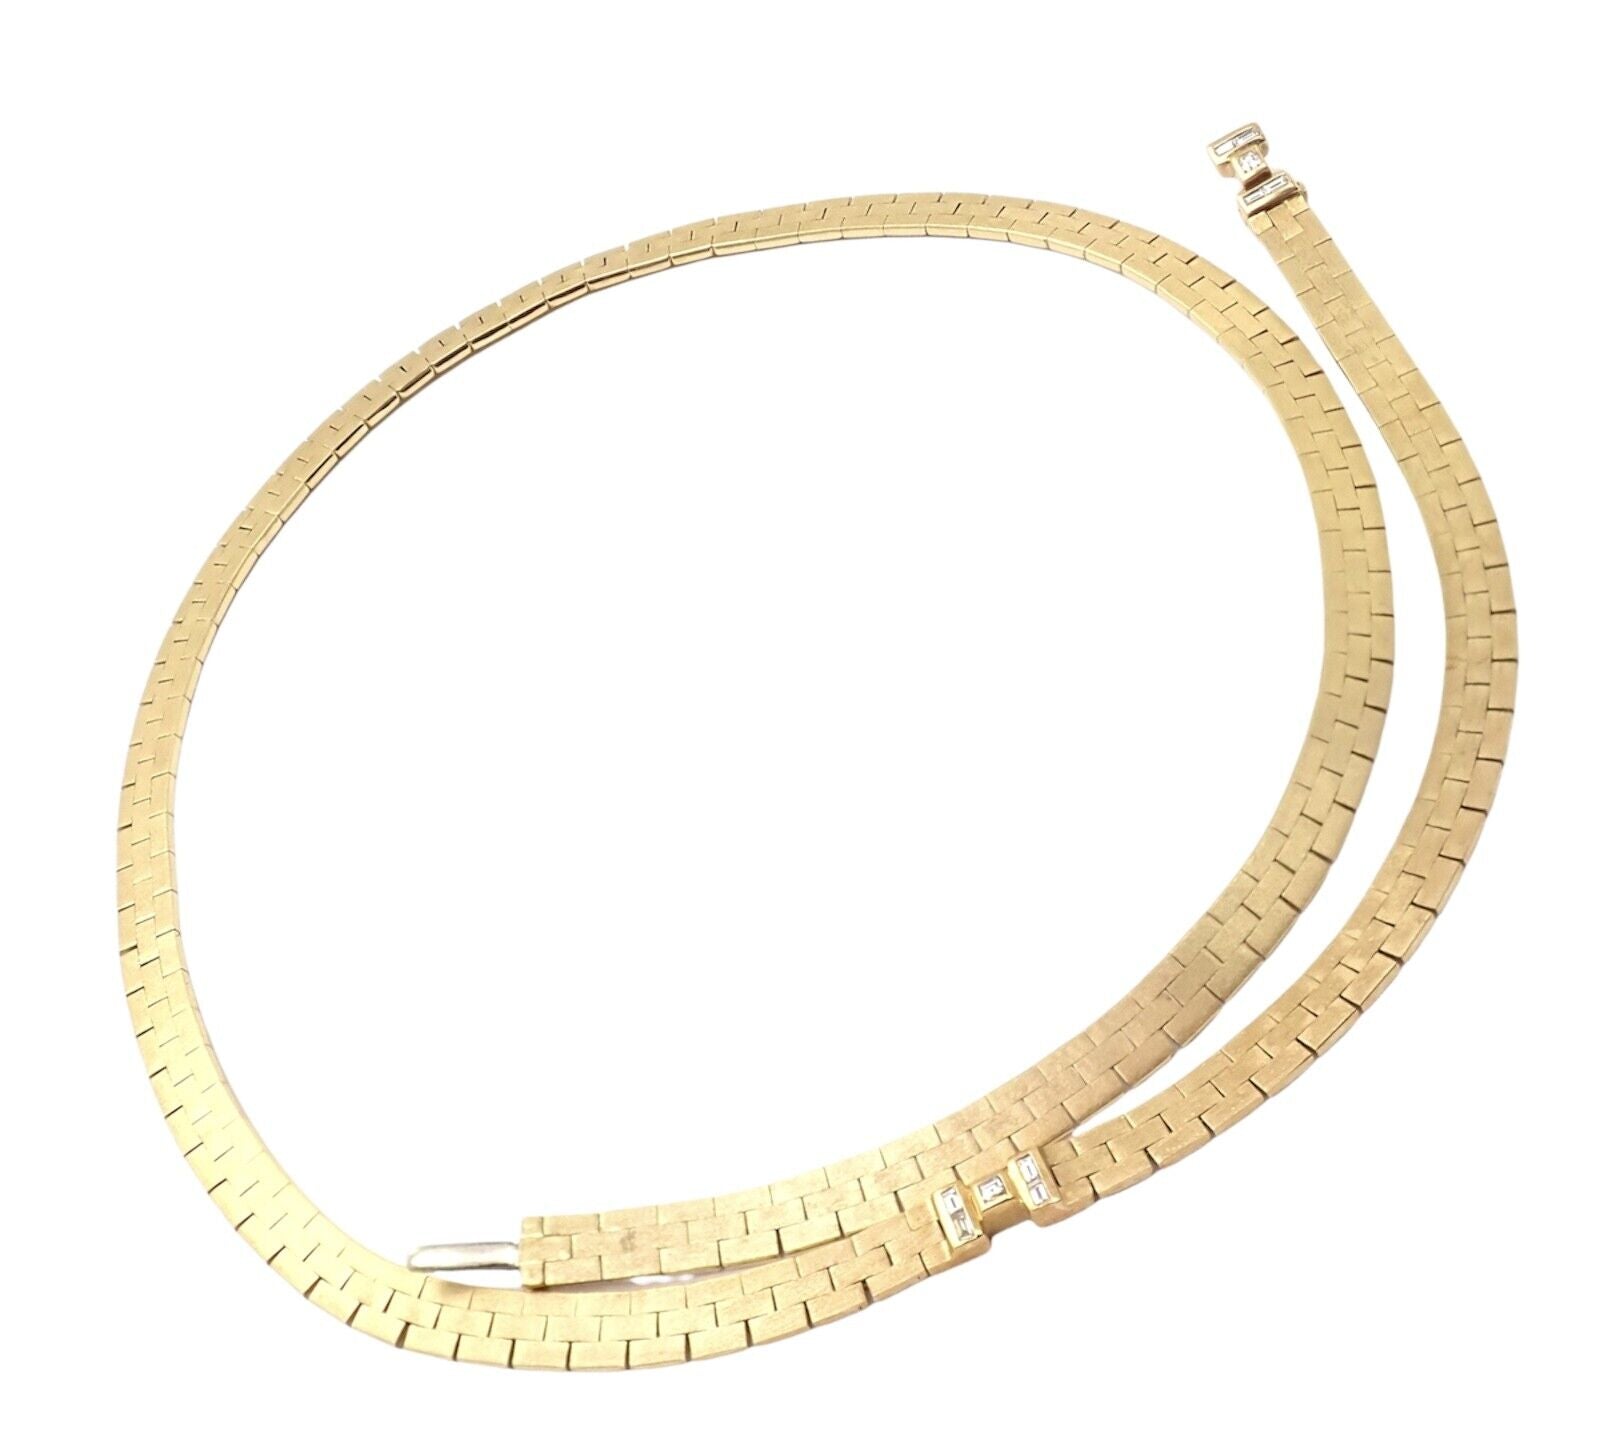 H. Stern Jewelry & Watches:Fine Jewelry:Necklaces & Pendants Rare! Authentic H. Stern 18k Yellow Gold Diamond Herringbone H Necklace